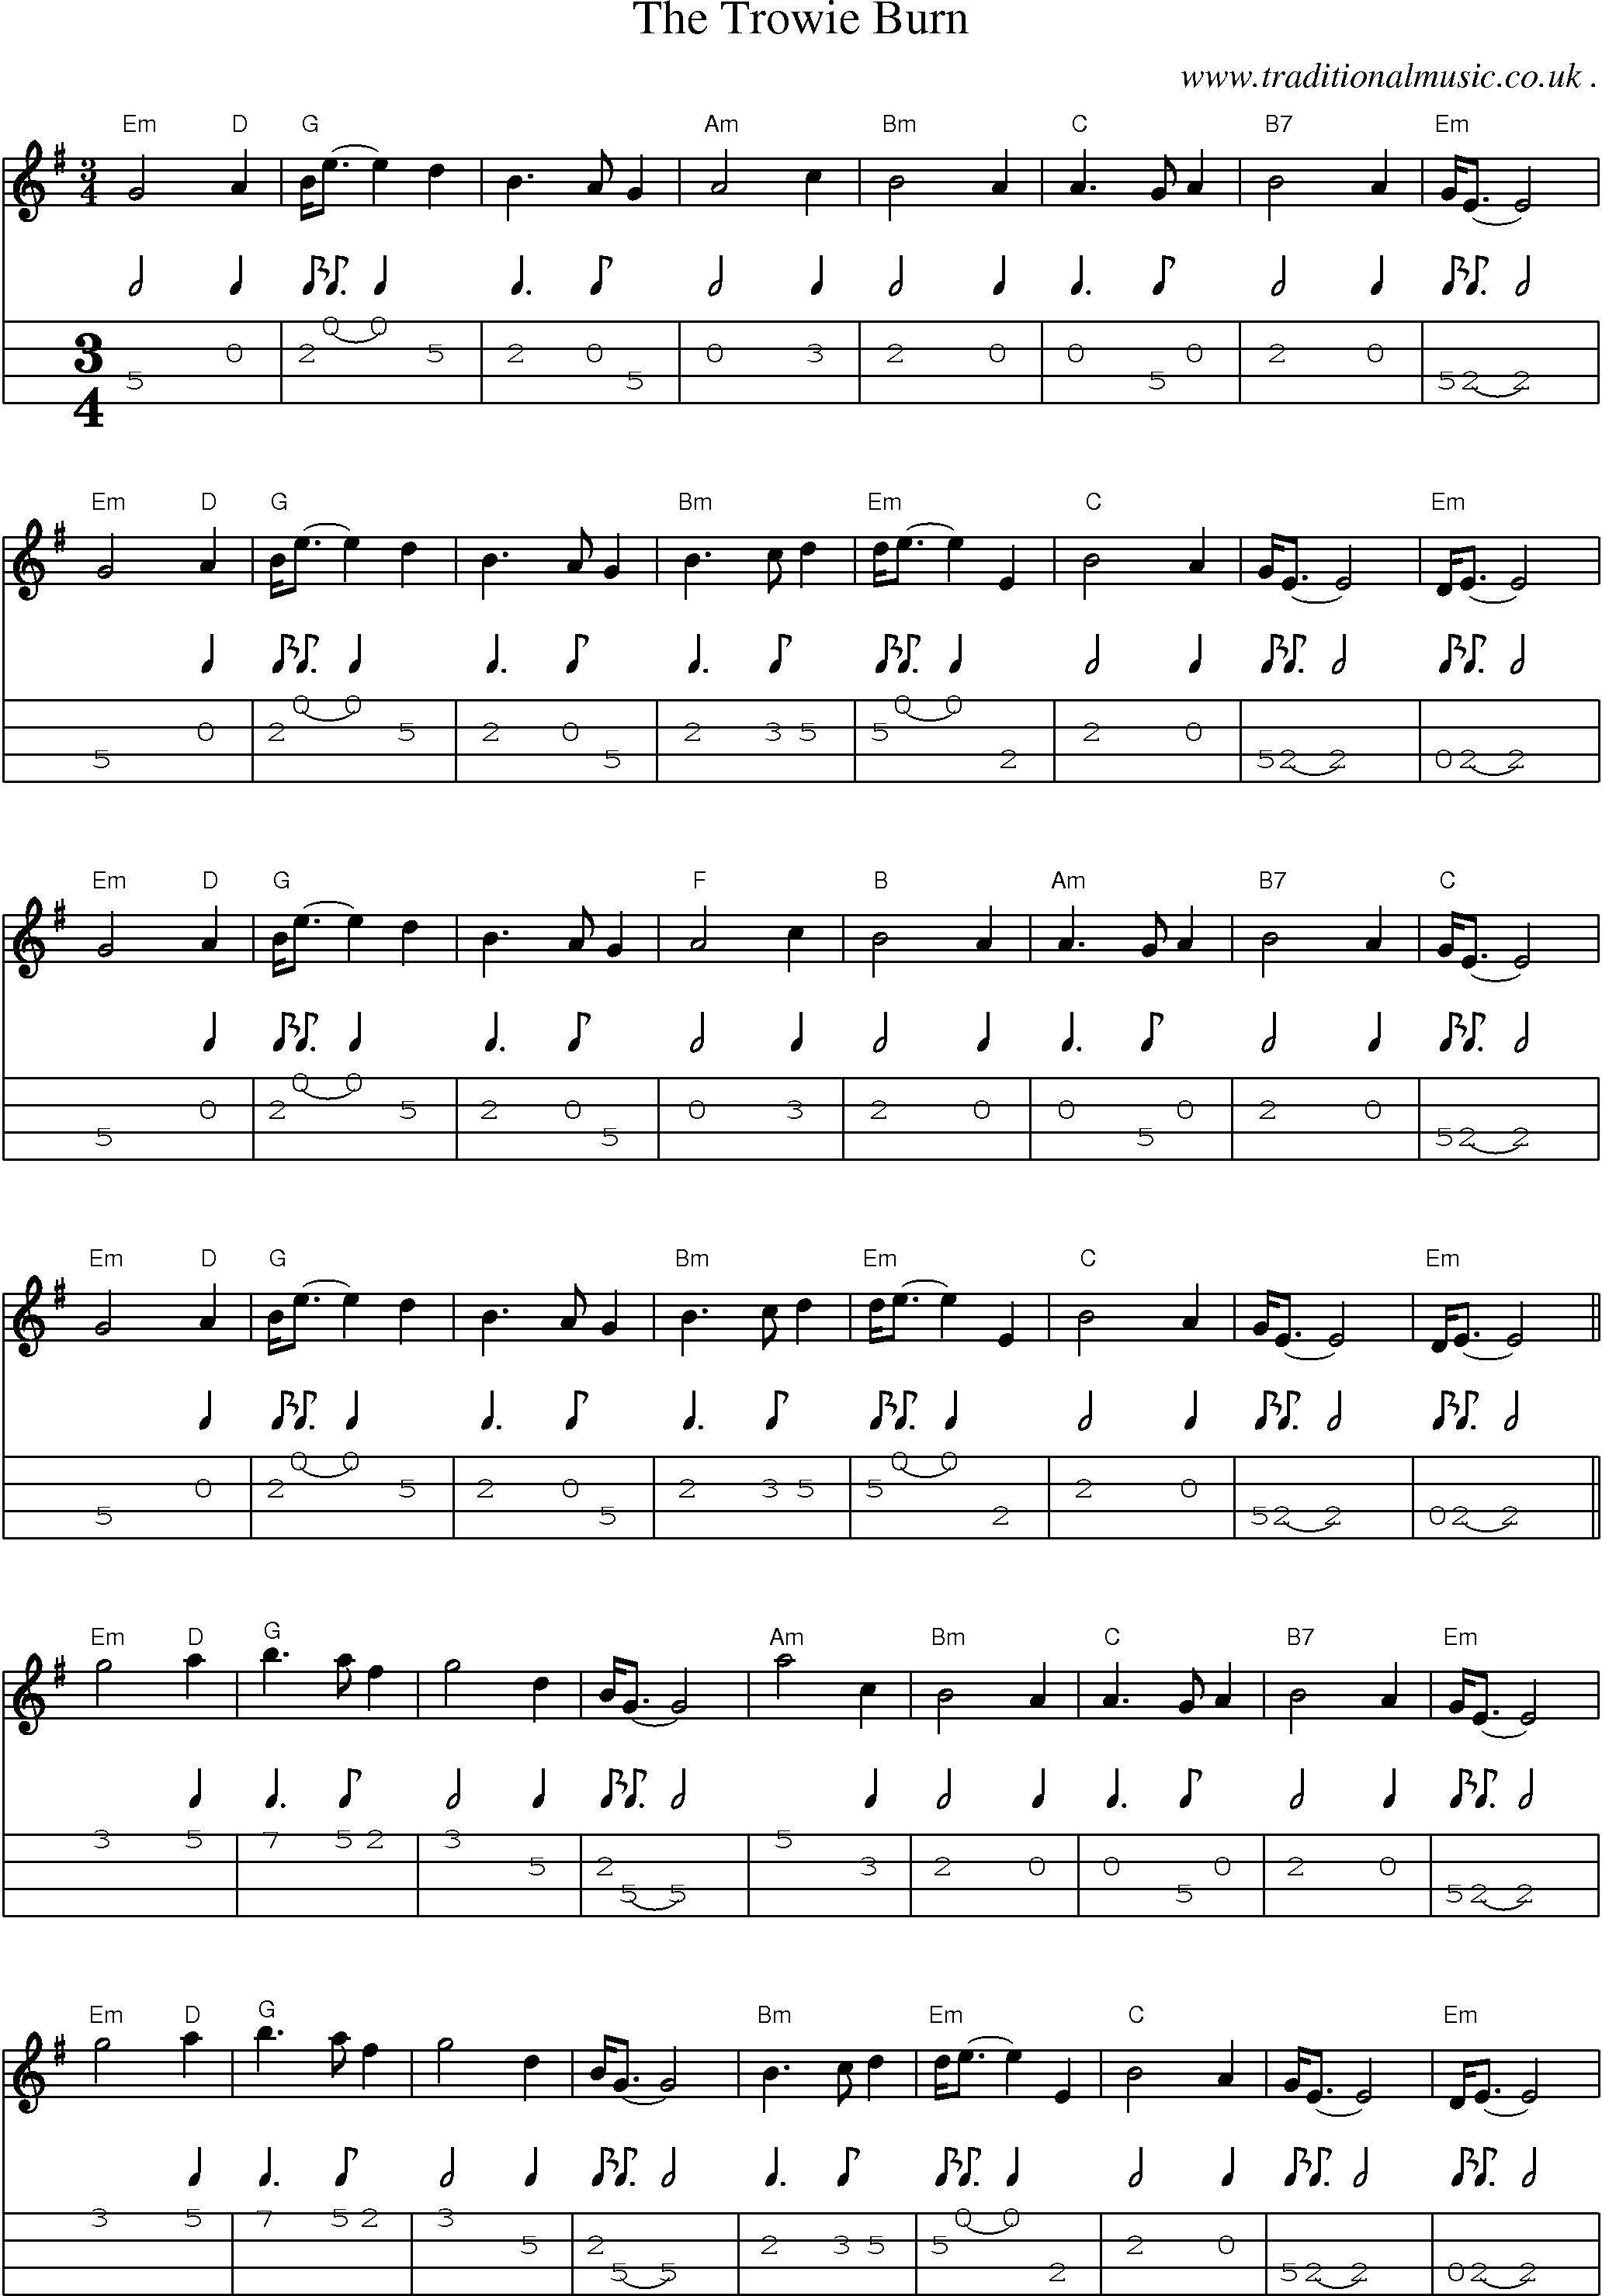 Music Score and Guitar Tabs for The Trowie Burn